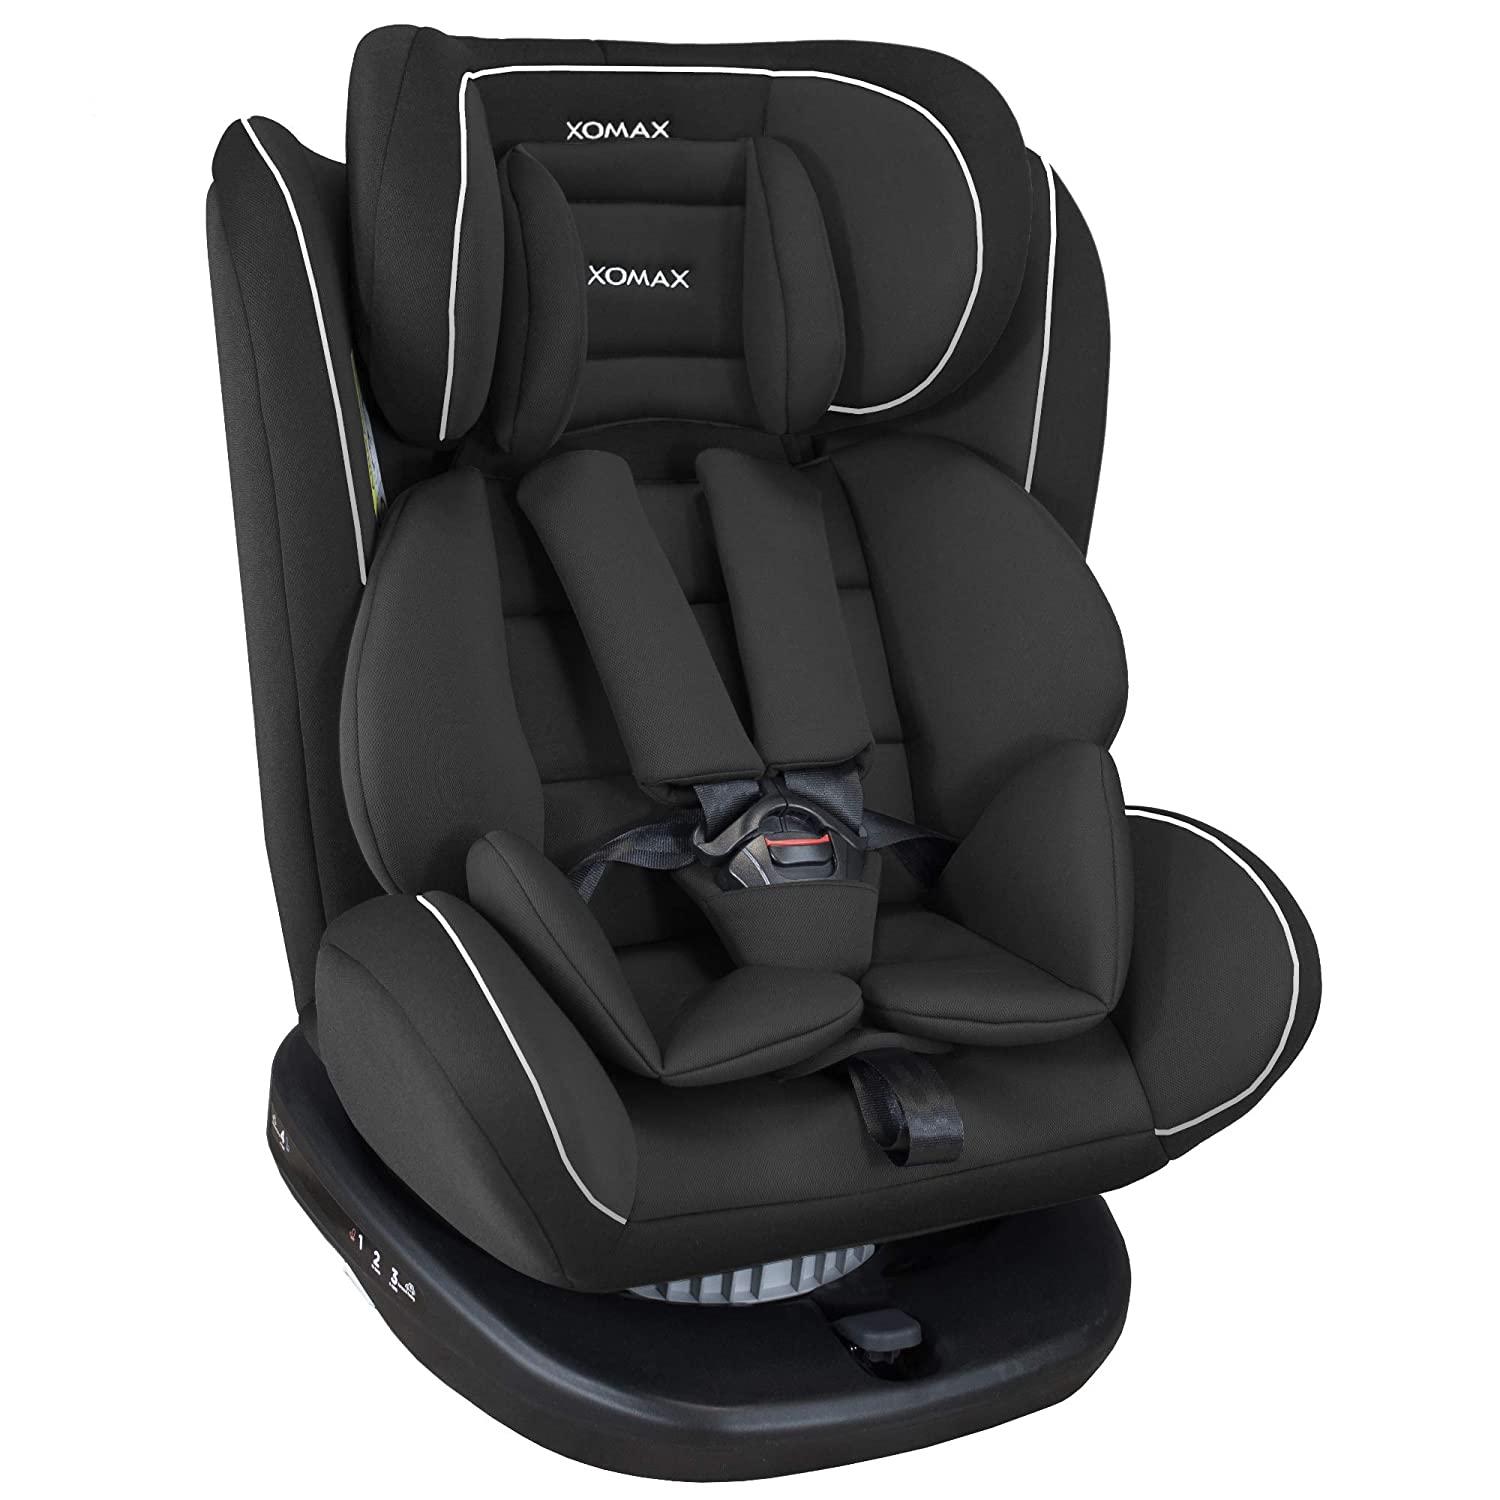 XOMAX 916 Child Seat Rotatable 360° with Isofix and Reclining Function, Grows with Your Child, 0-36 kg, 0-12 years, Group 0/1/2/3, 5-Point Harness and 3-Point Harness, Removable Cover, Washable ECE R44